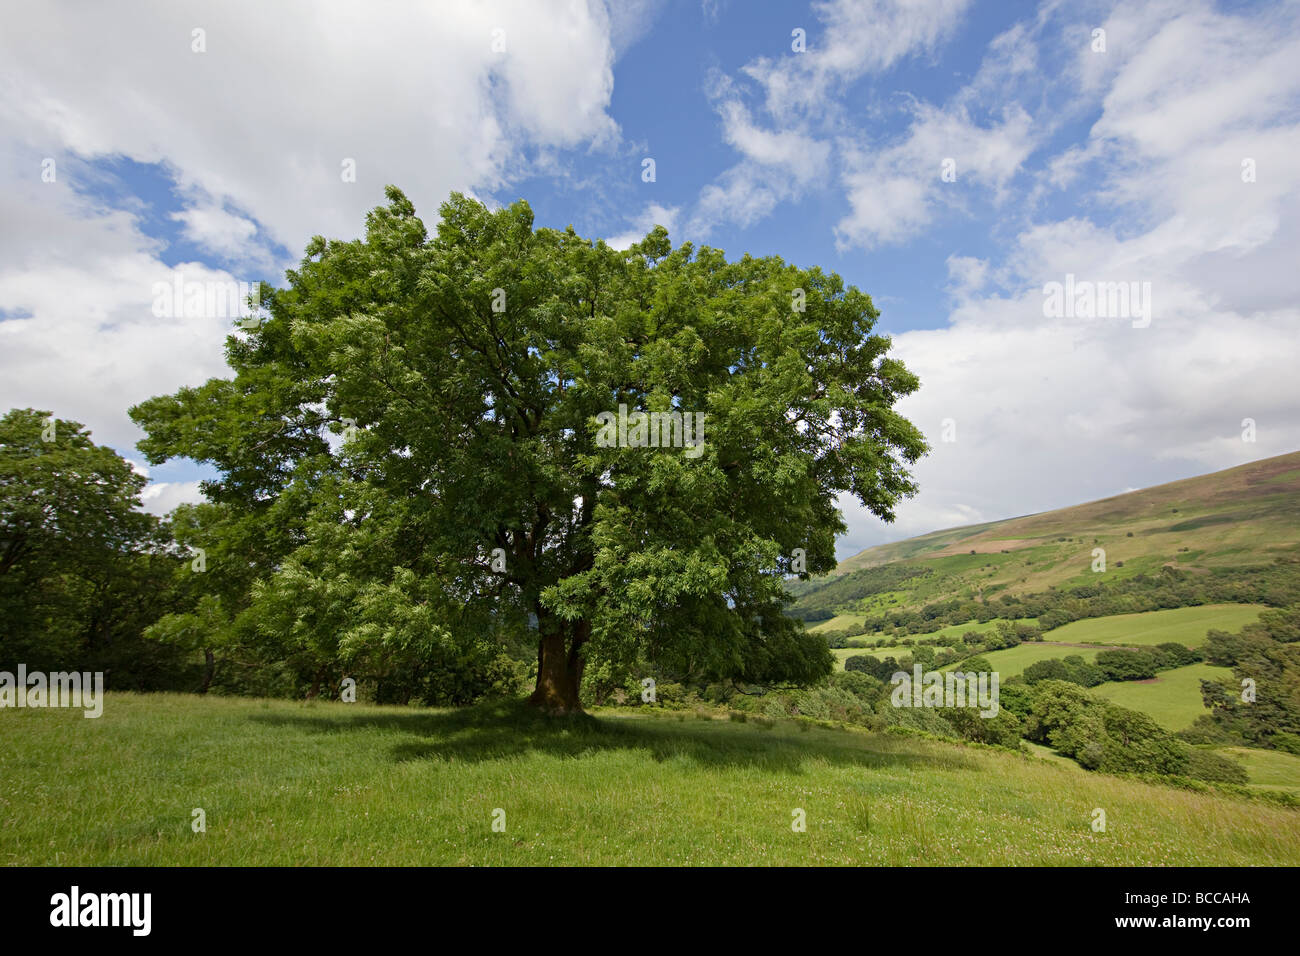 Ash tree in countryside Brecon Beacons national park Wales UK Stock Photo